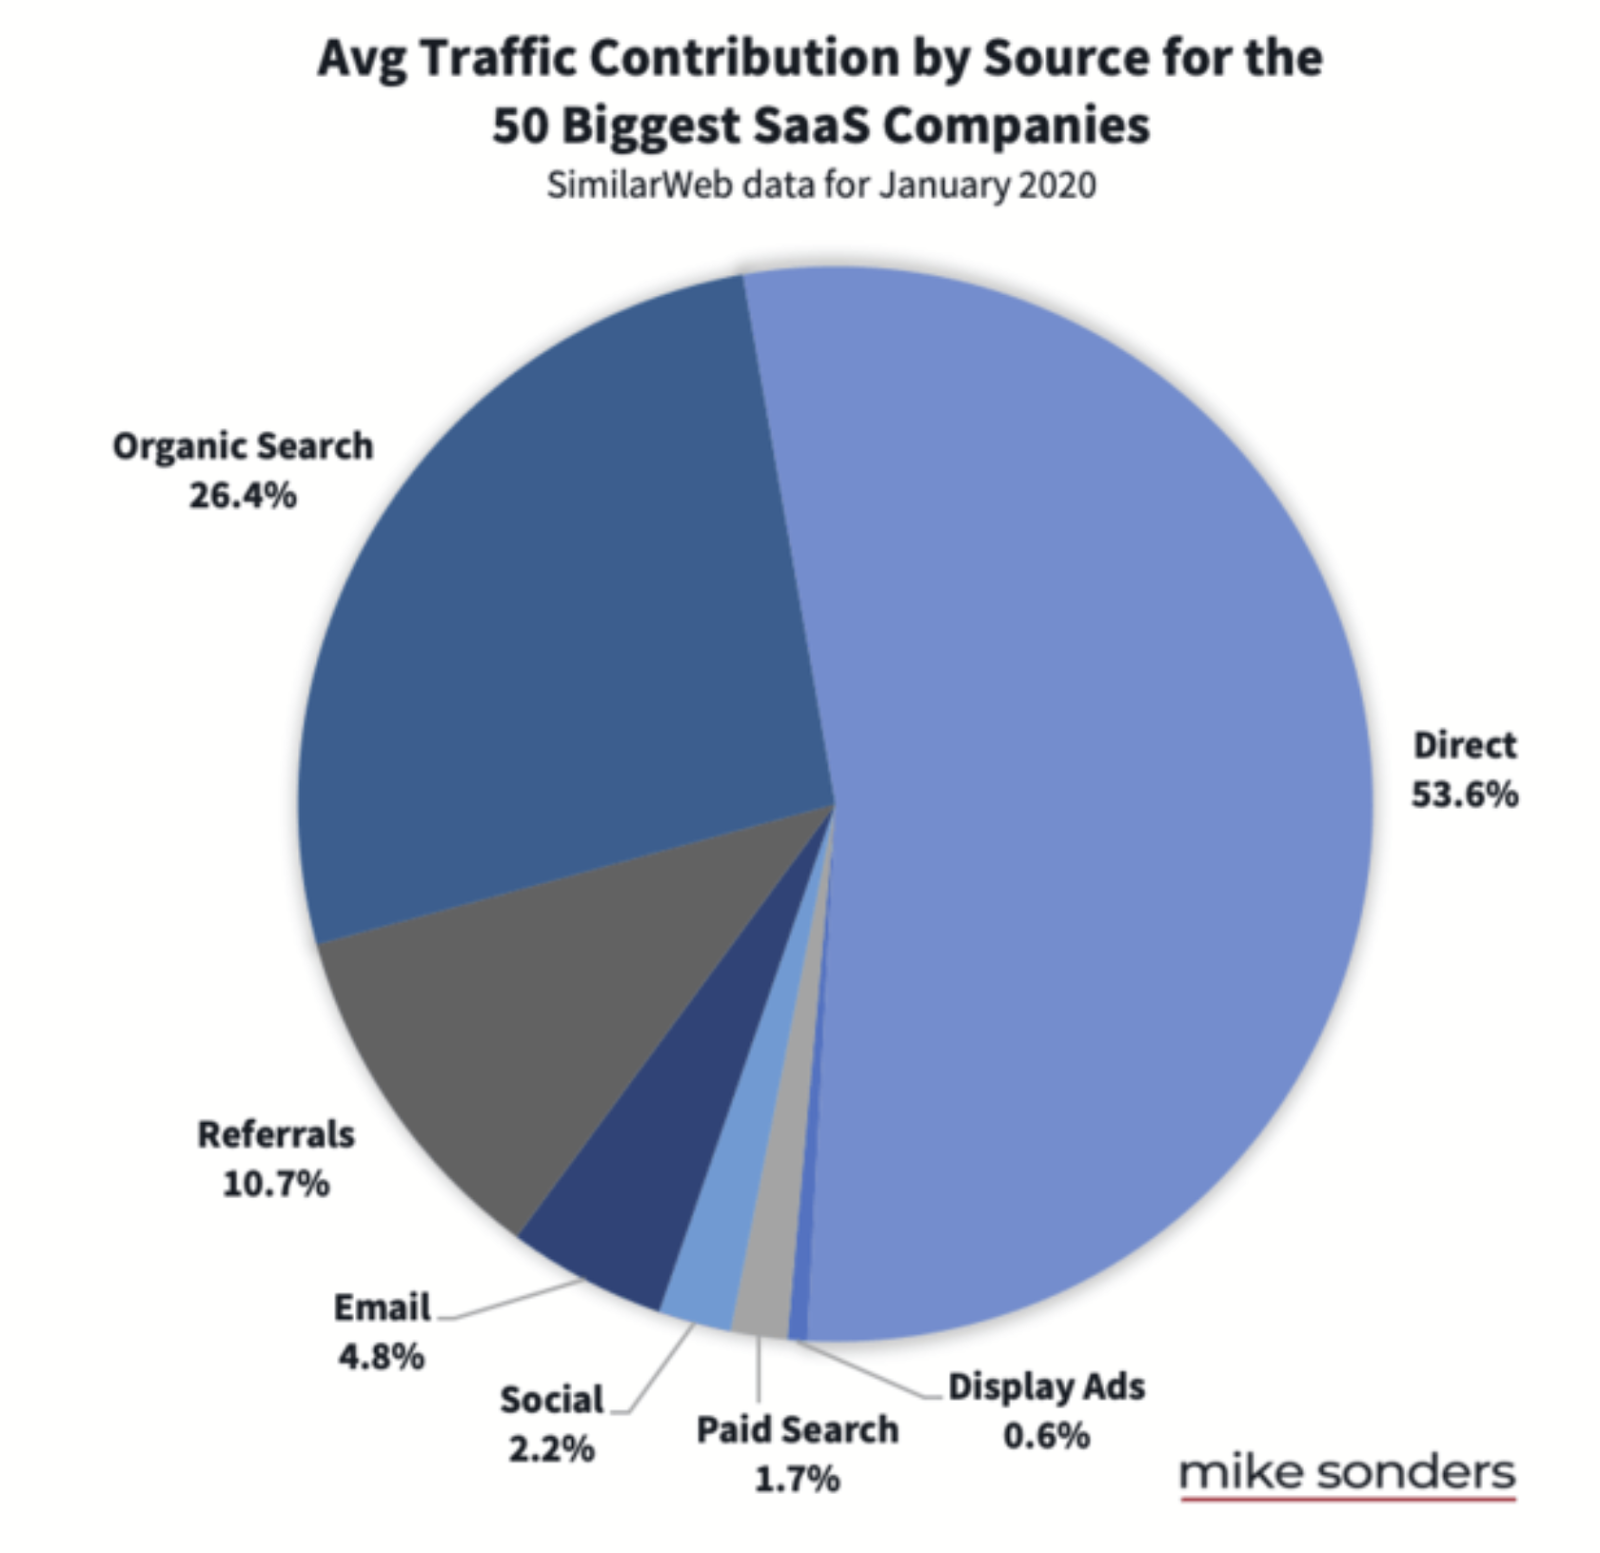 Average traffic contribution by source for the 50 largest SaaS companies